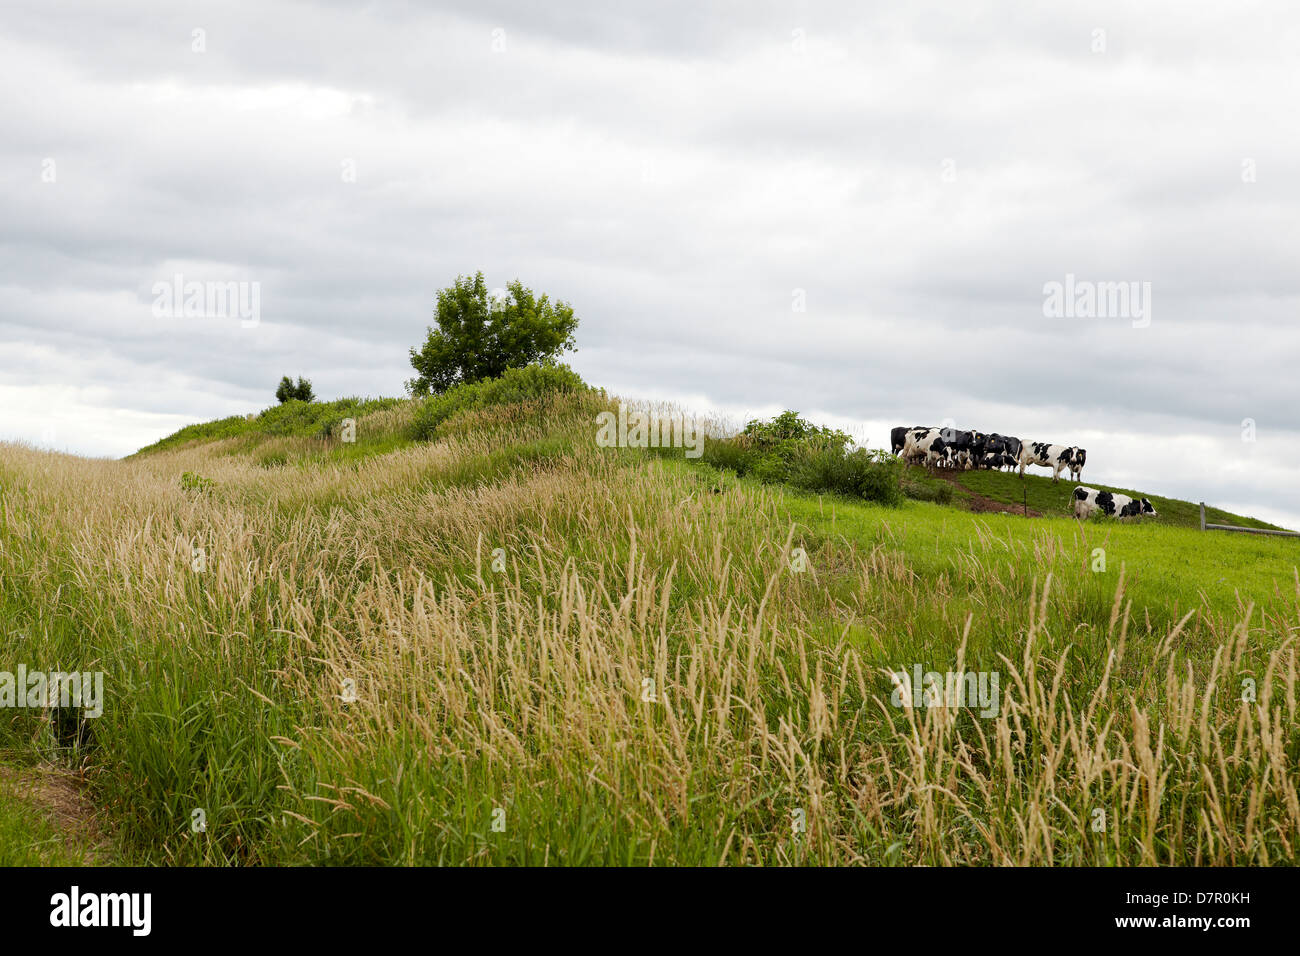 Herd of cows on hill side pasture with stormy sky in Wisconsin, USA Stock Photo